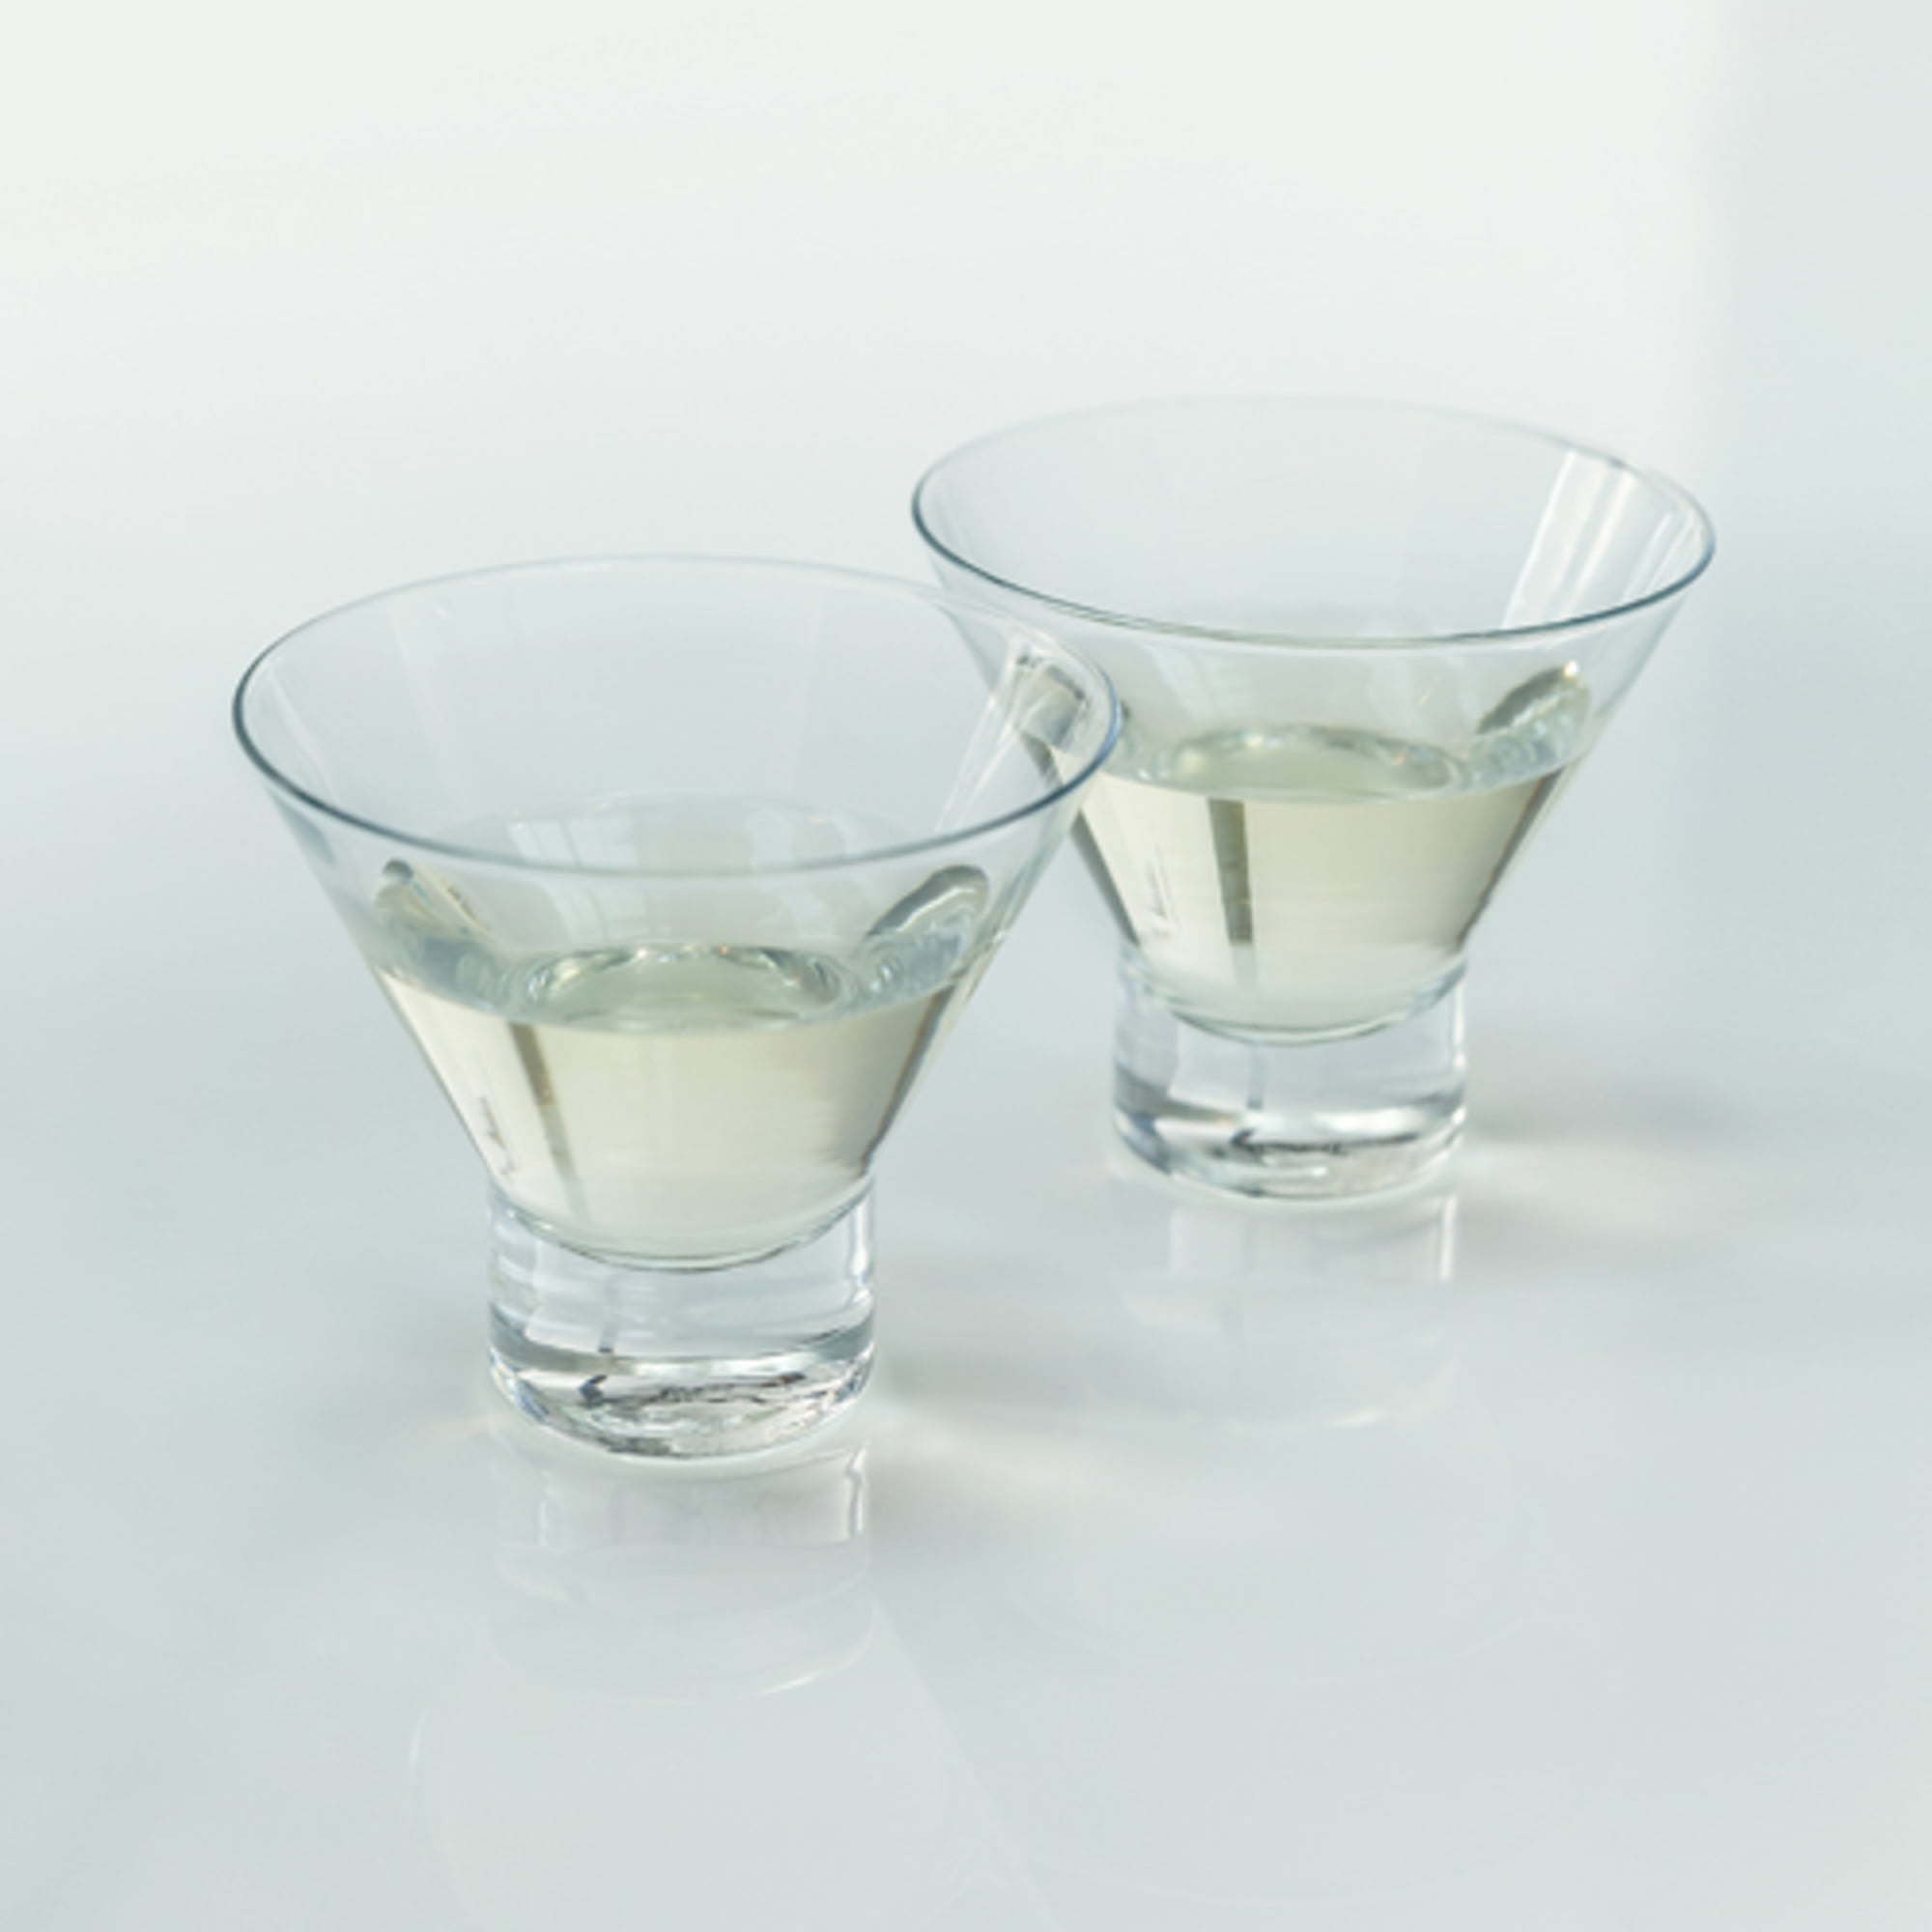 Viski Faceted Martini Glasses, Preium Crystaal Cocktail Coupe Glasses, Home  and Bar Drinkware, Stemm…See more Viski Faceted Martini Glasses, Preium